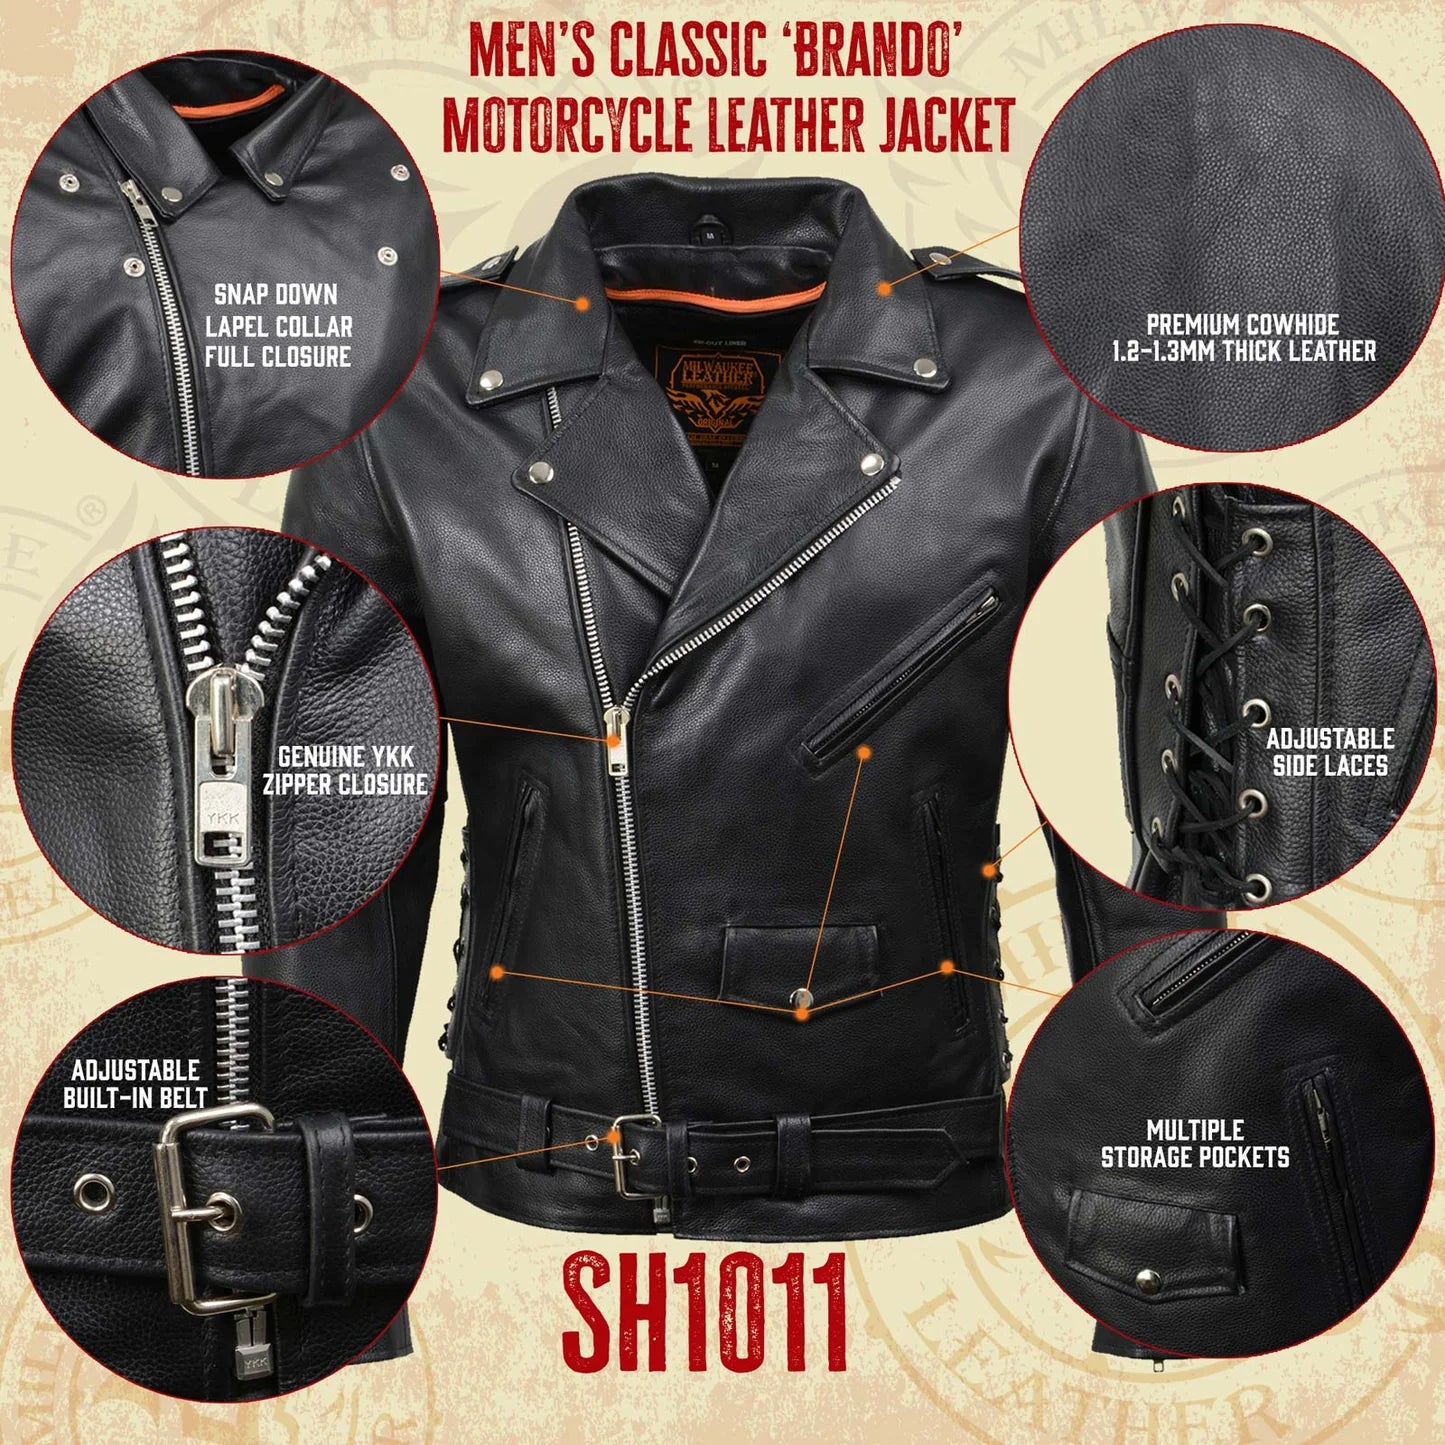 Black Classic Police Motorcycle Jacket for Men Made of Cowhide Leather w/ Side Lacing